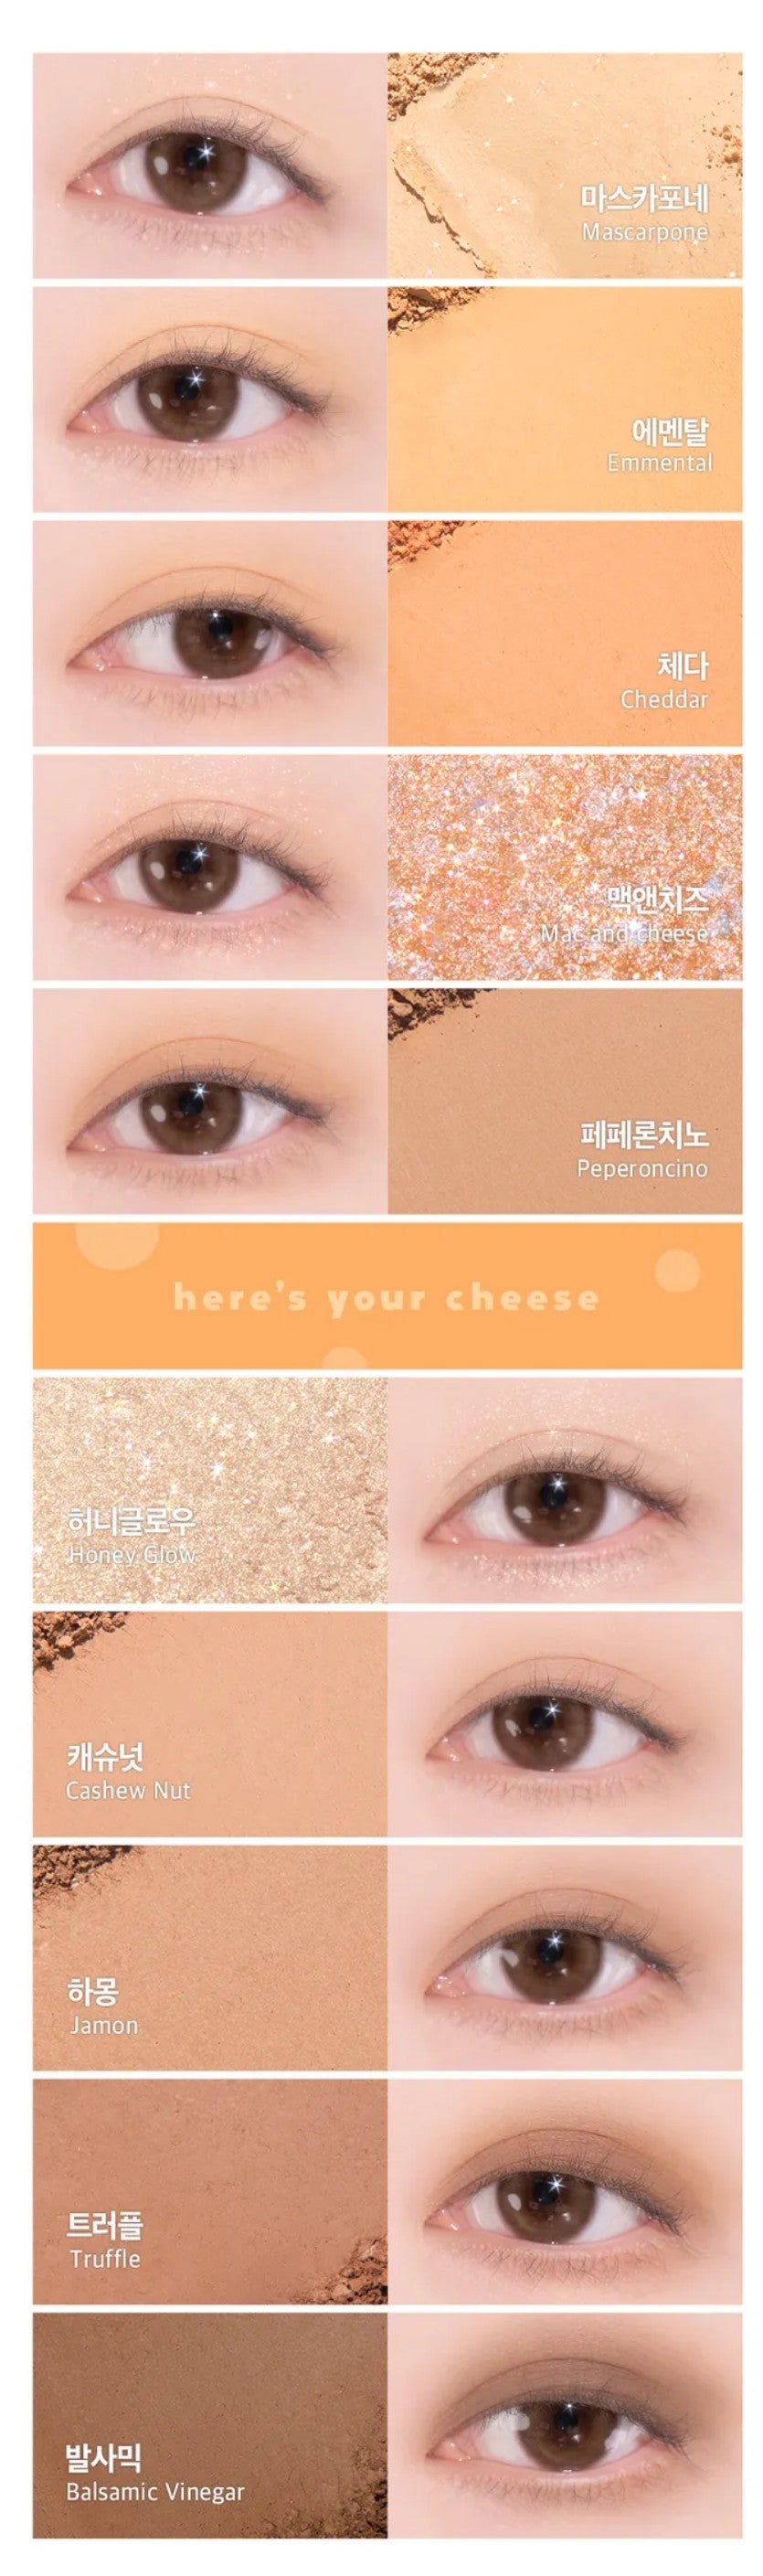 [Lilybyred] Mood Keyboard - Cheese Mood eyeshadow palette No. 6 Cheese Plate + cheese shaped mood light lamp